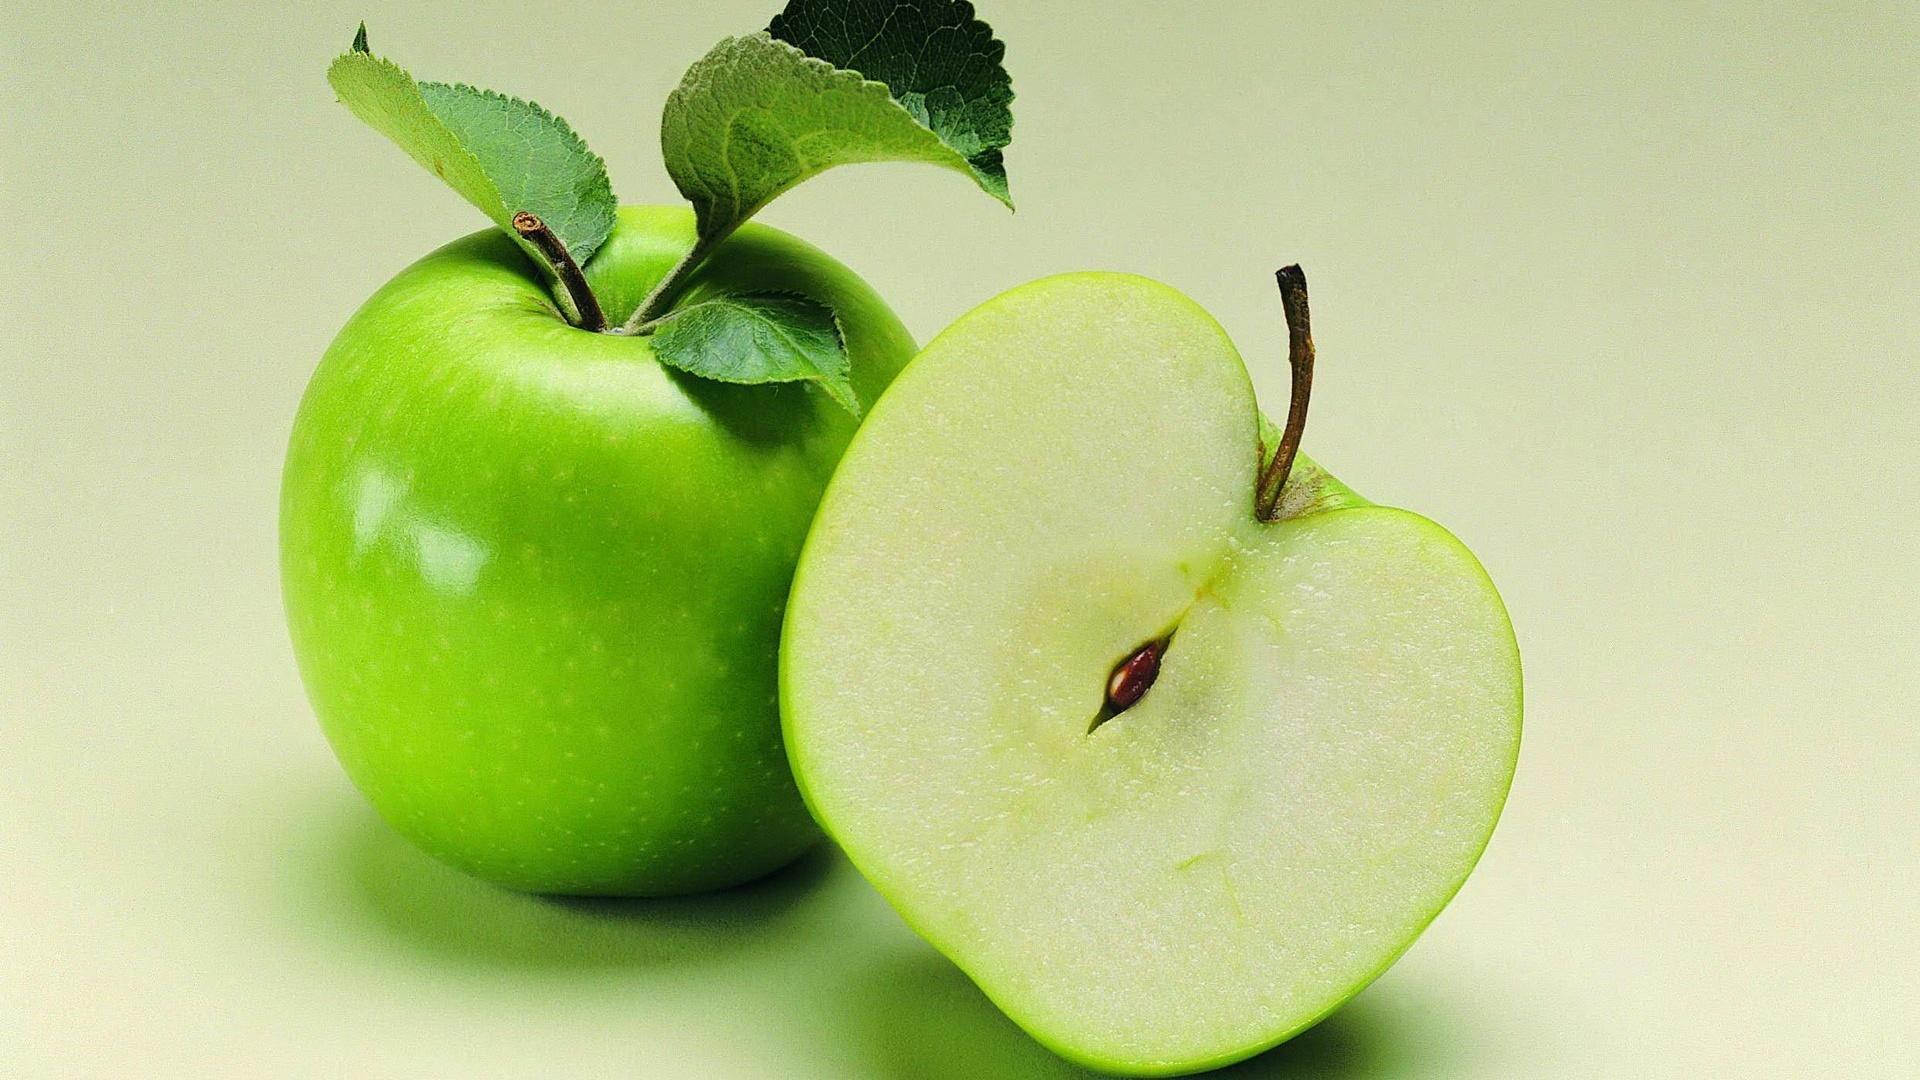 Green apple fruit wallpapers for Android.